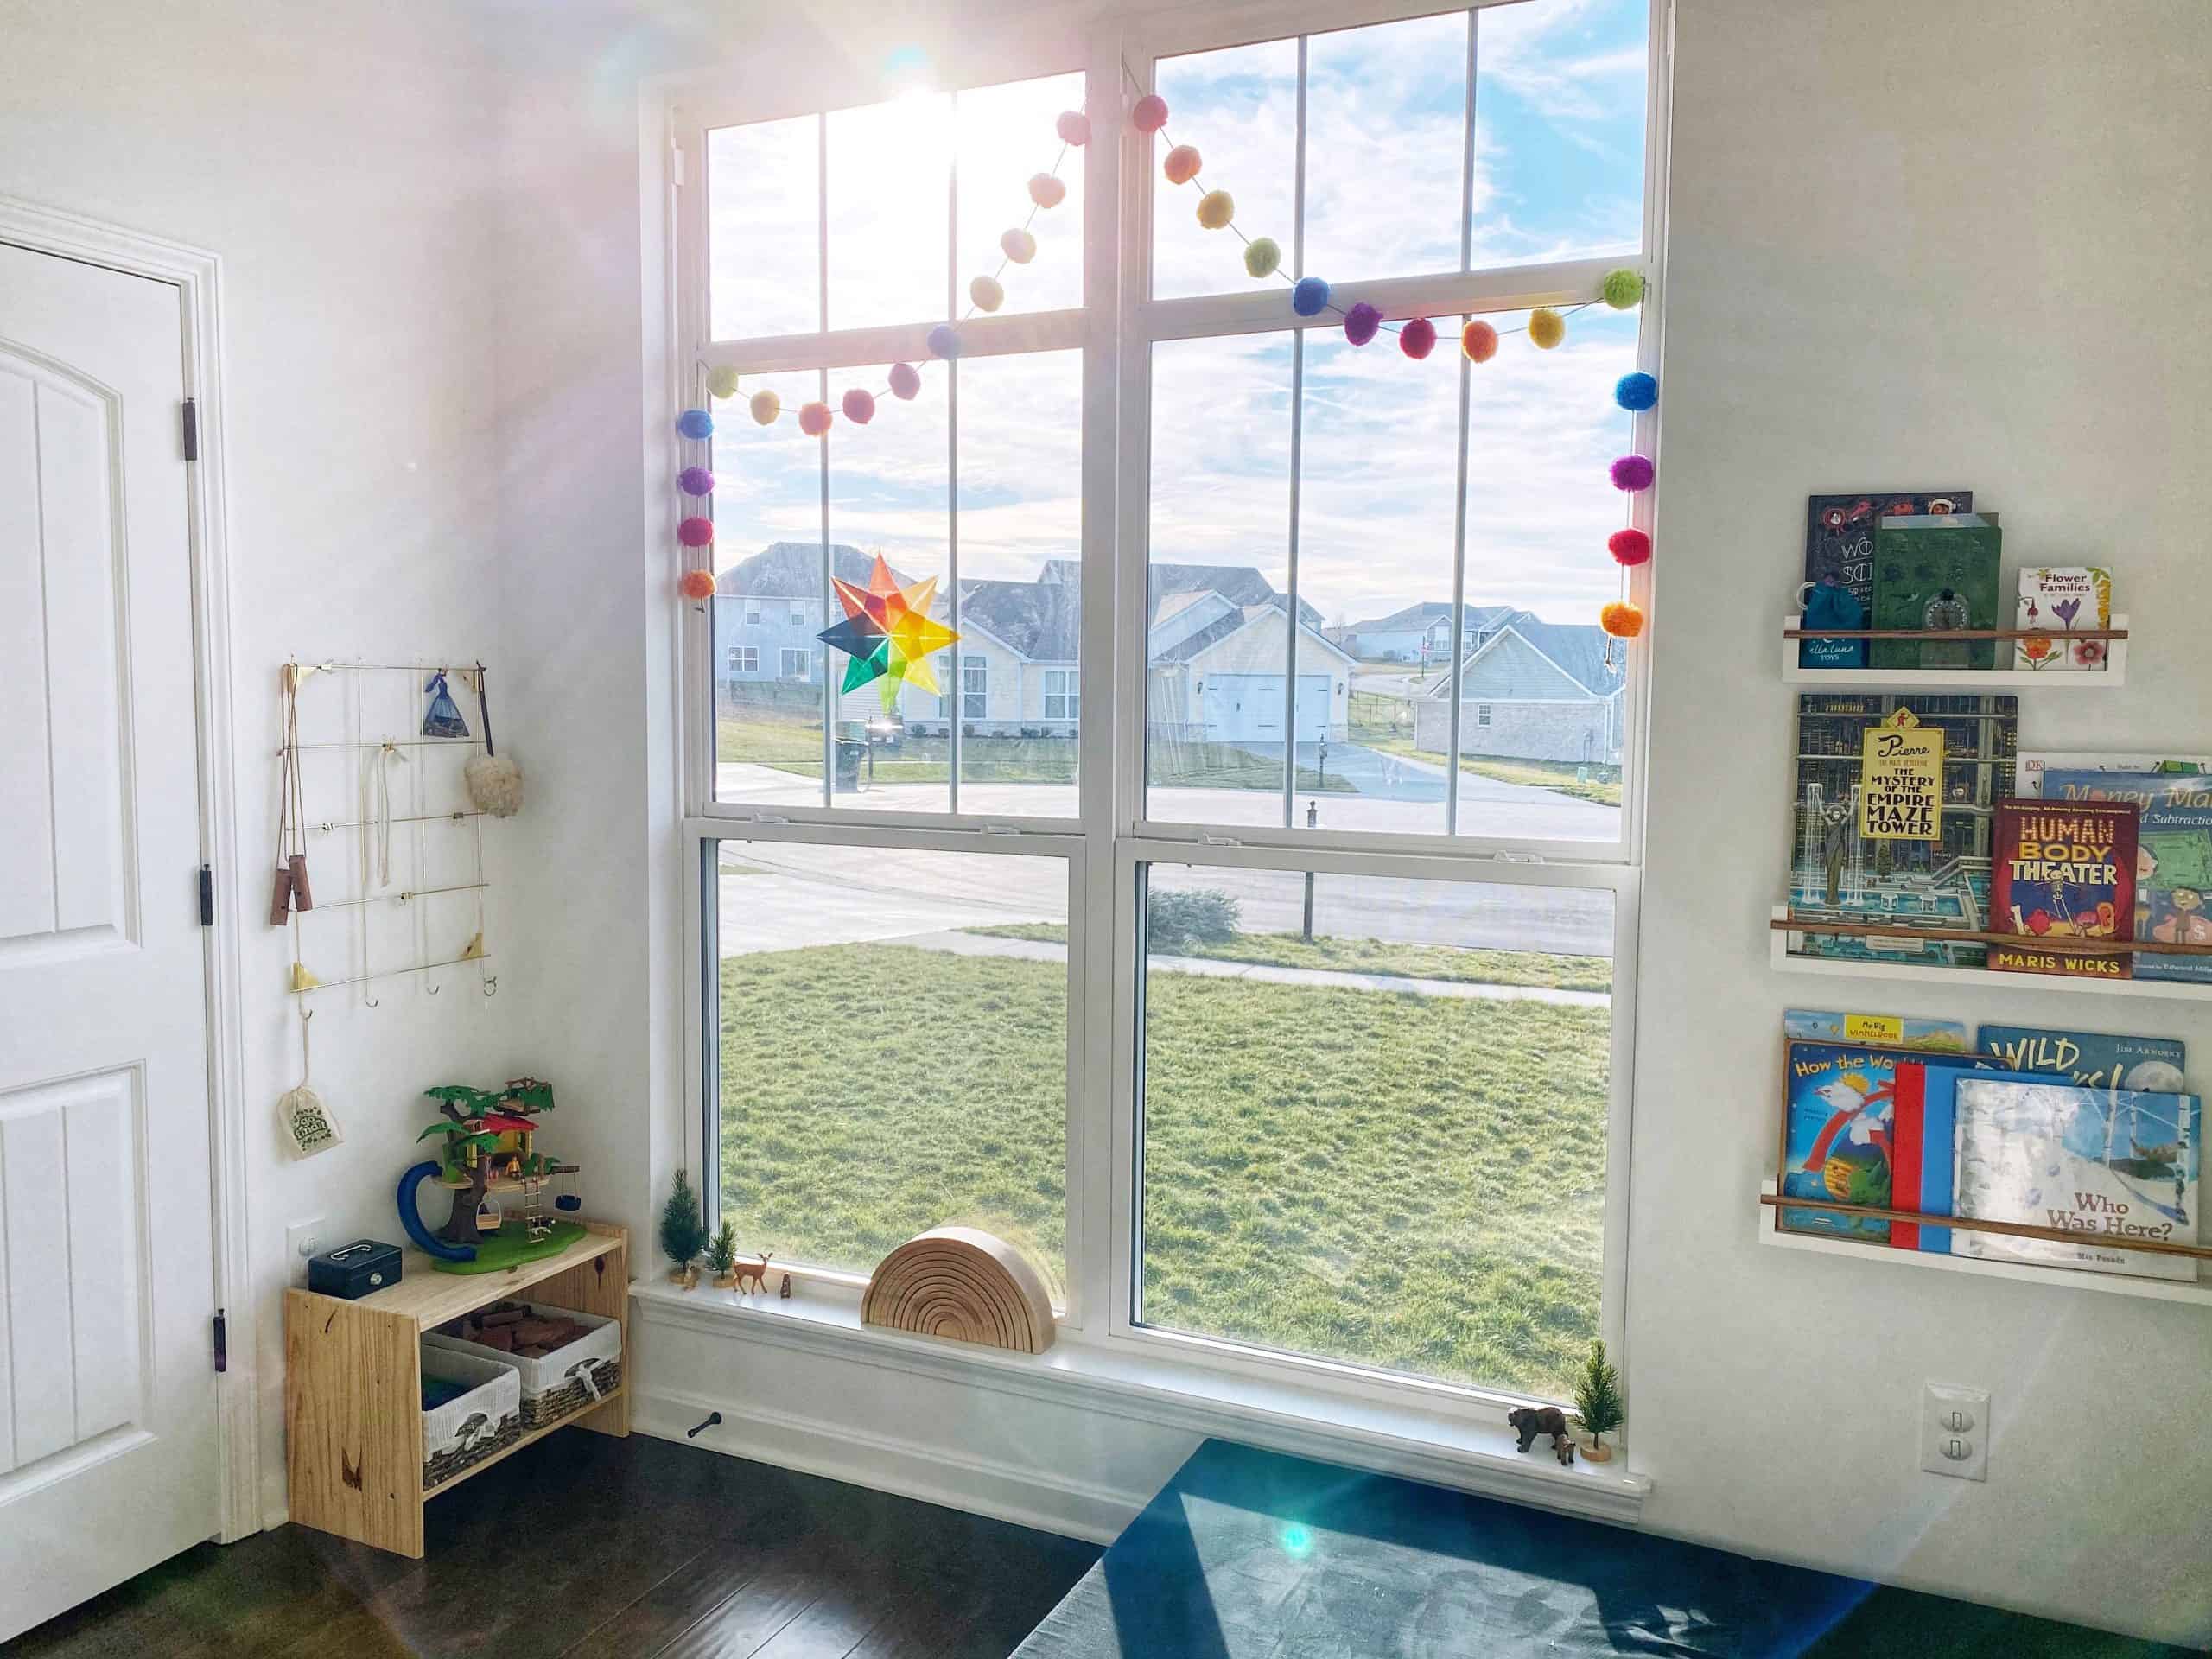 Tour a Montessori-inspired schoolroom + playroom for multiple children at www.freeandunfettered.com. You can also download a free guide to help you design your own prepared environment for your children at home. #montessori #designingspacesforchildren #preparedenvironment #montessoriathome #homeschoolroom #homeschooling 